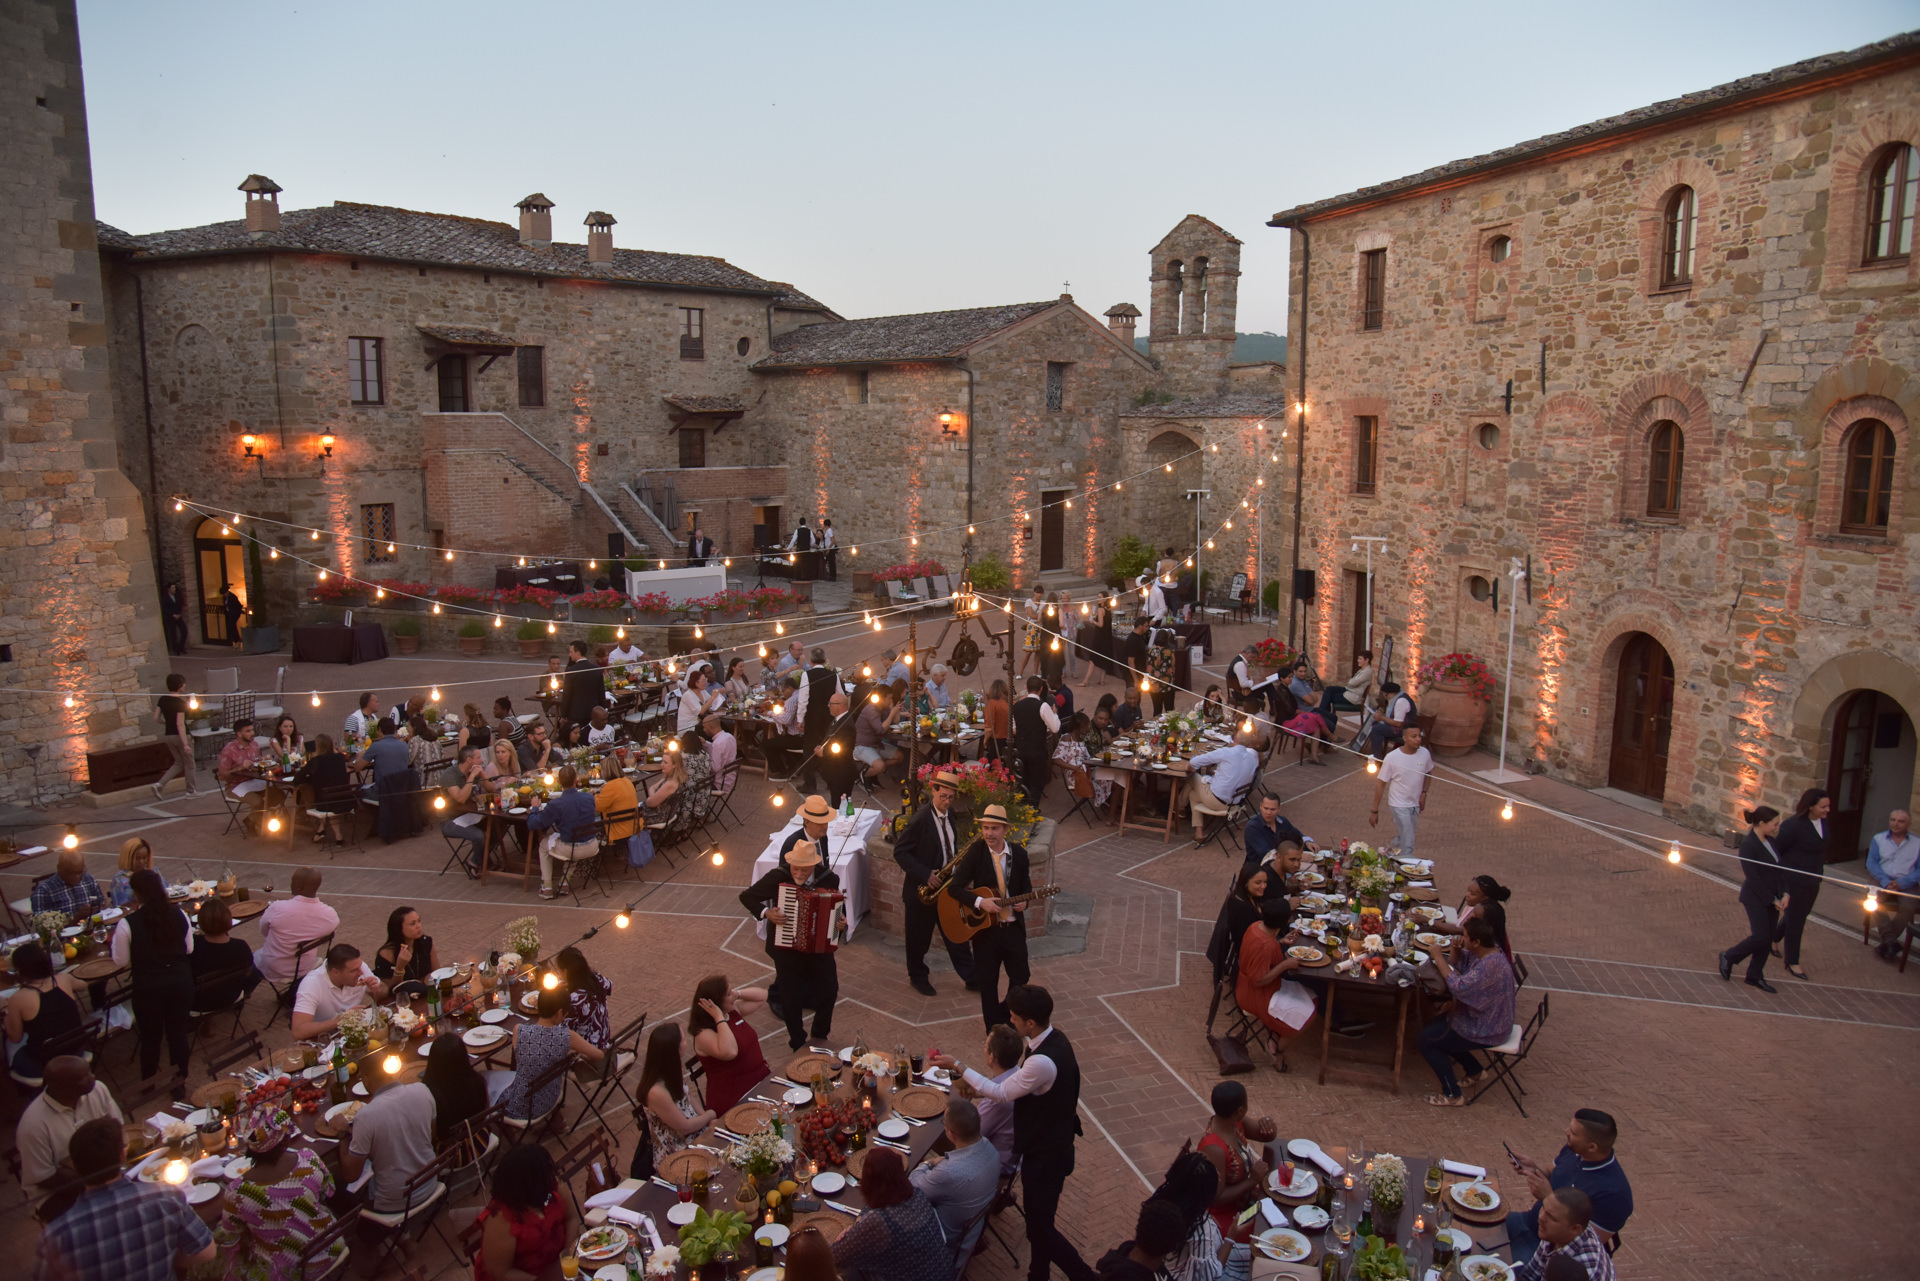 event in a Tuscan hamlet